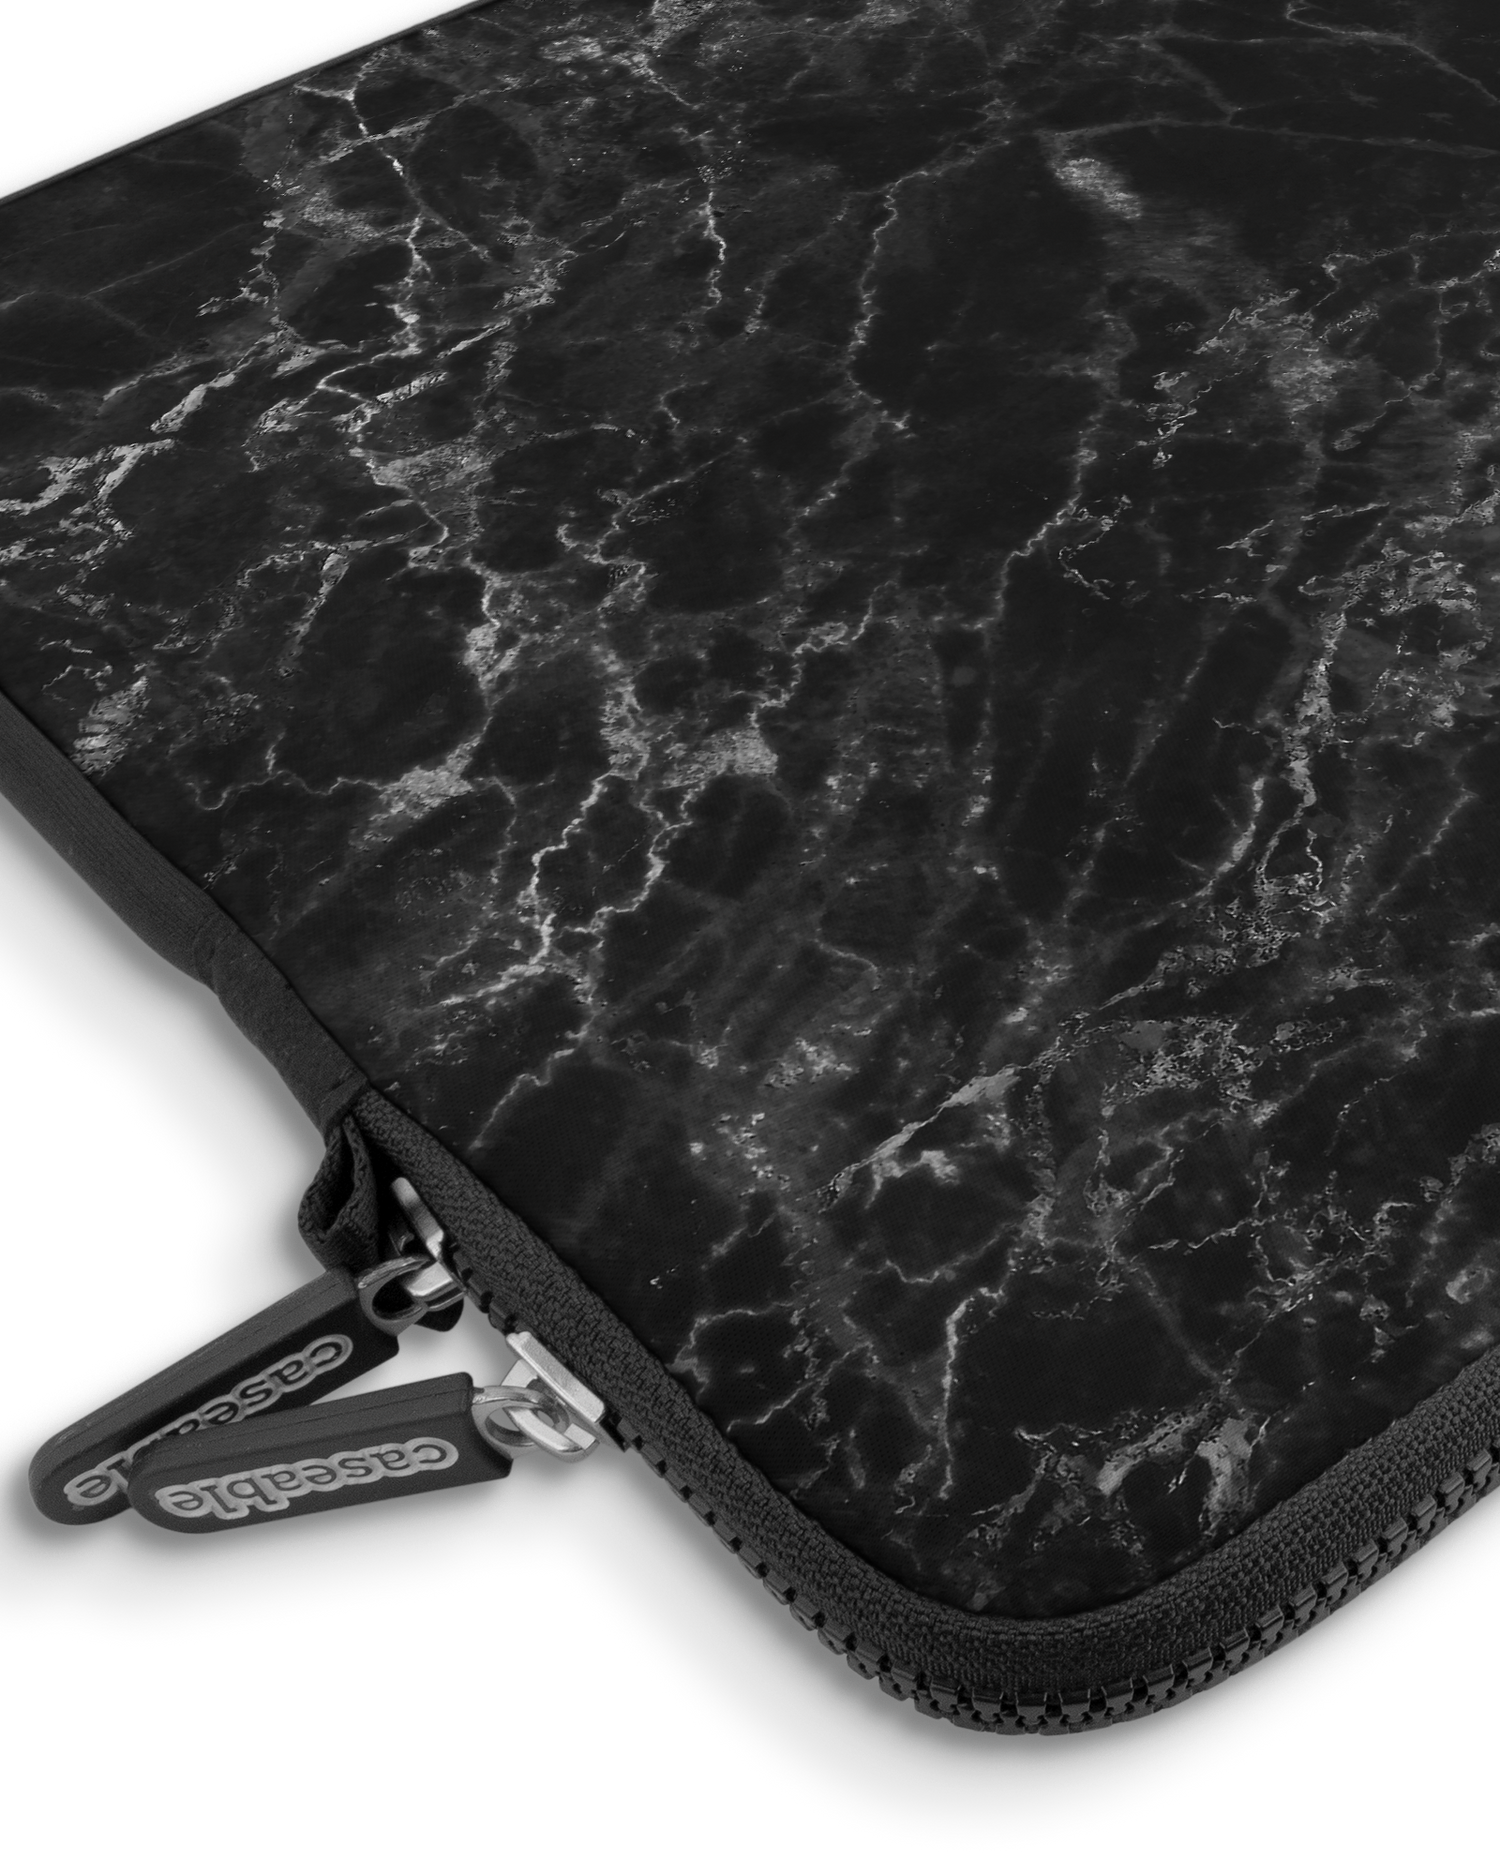 Midnight Marble Premium Laptop Bag 15 inch with device inside